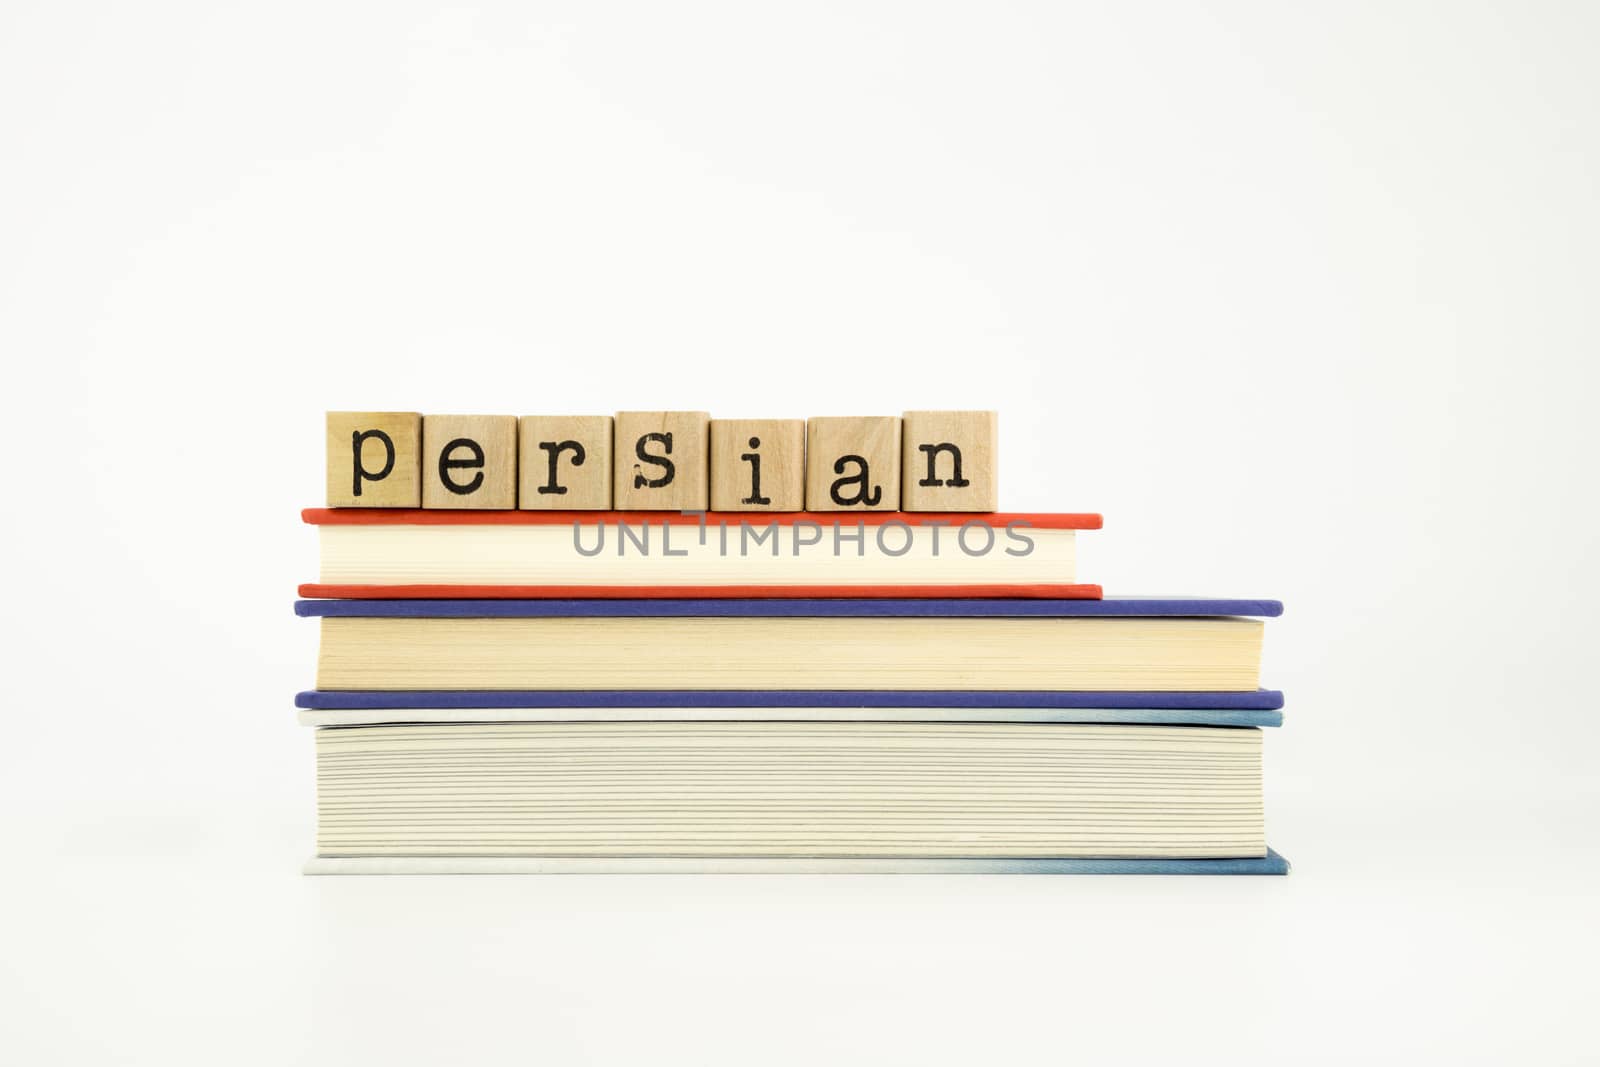 persian language word on wood stamps and books by vinnstock